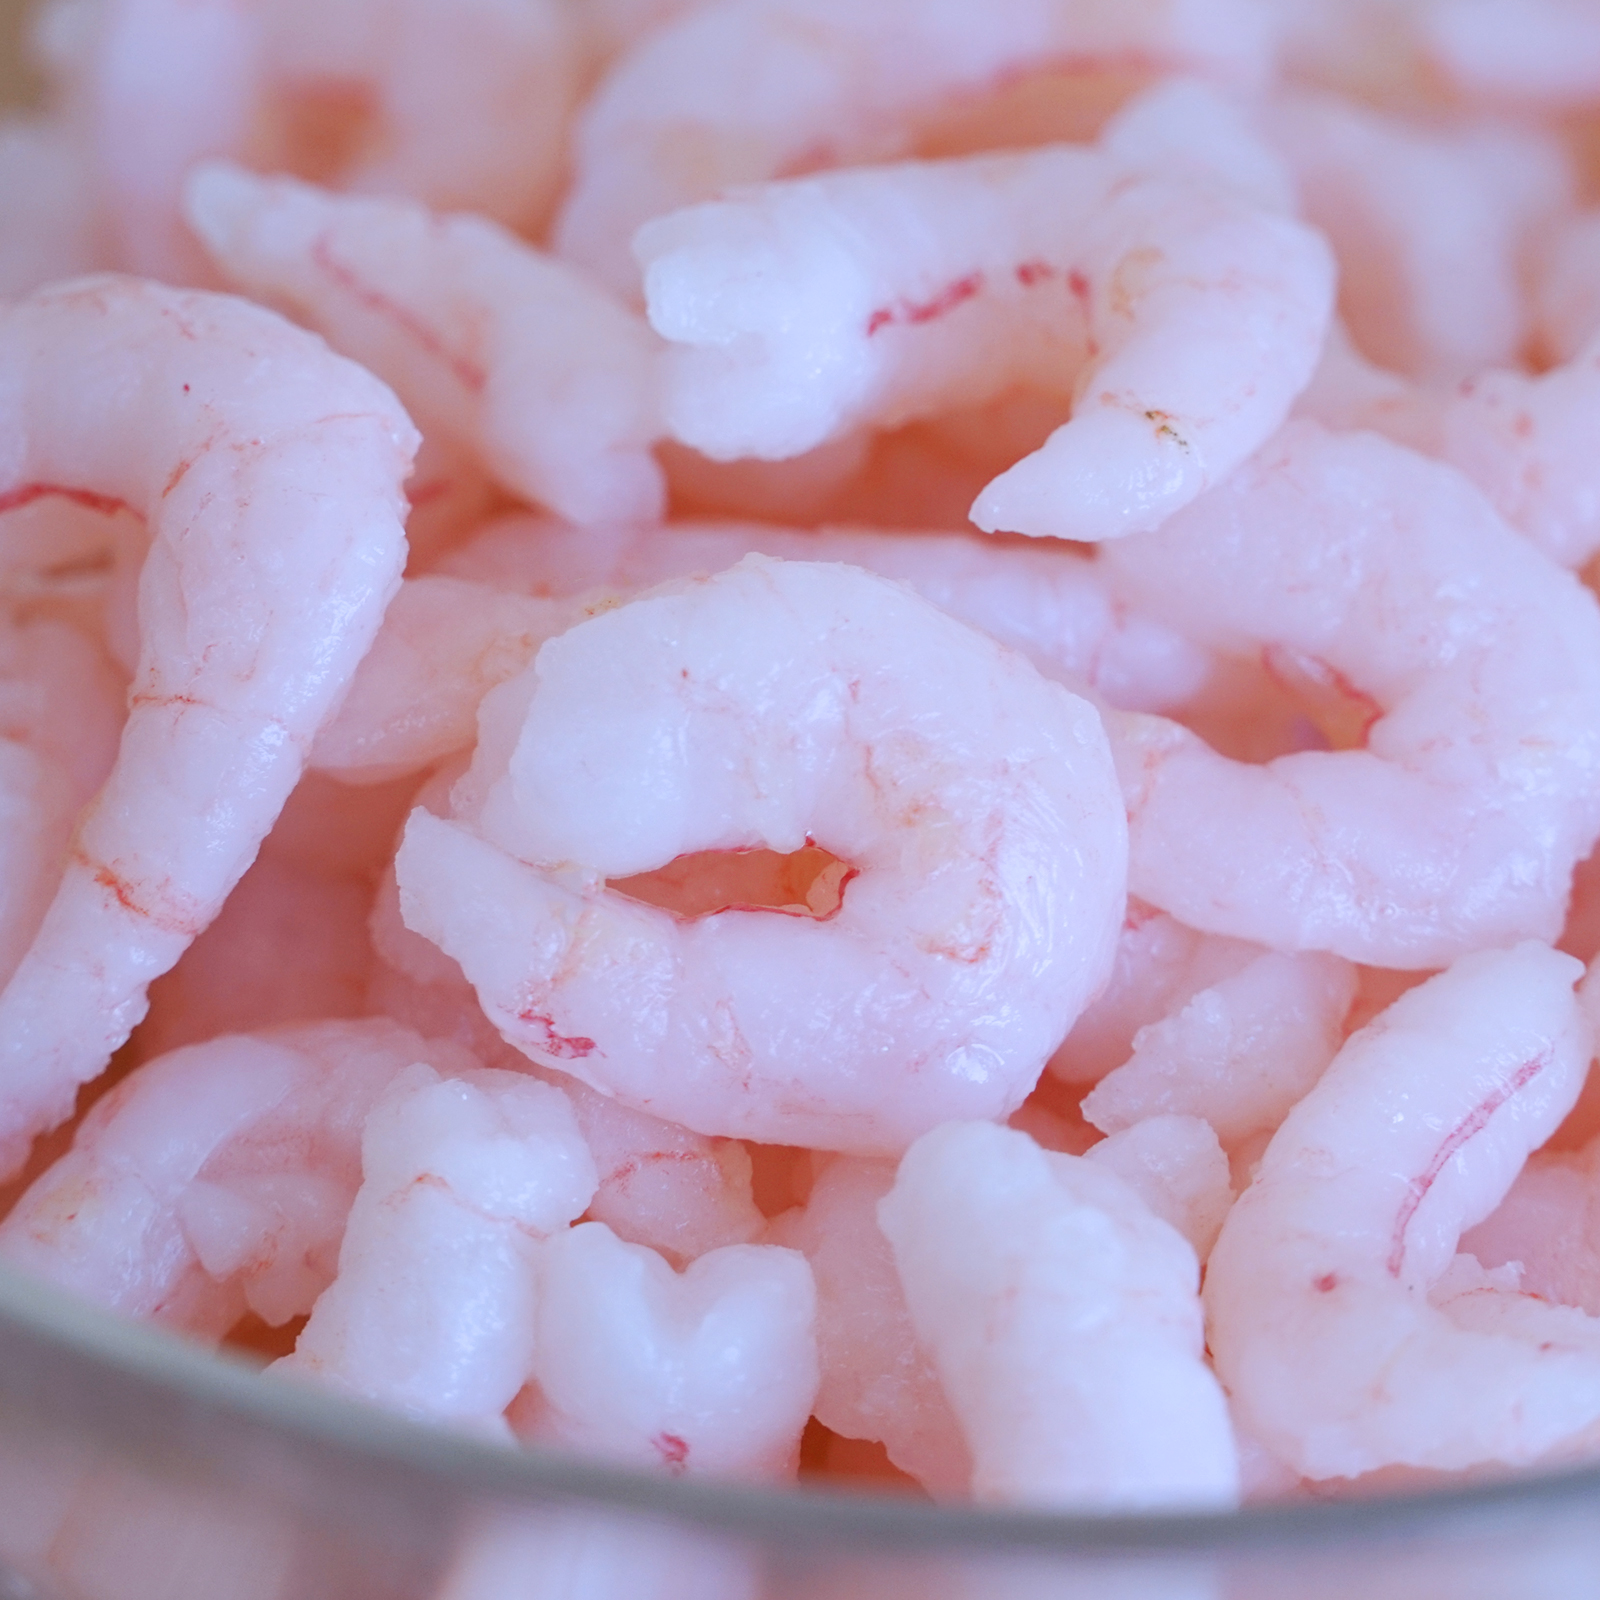  no addition preservation charge un- use freezing natural northern shrimp ... Boyle ending under processing un- necessary 454g approximately 250~350 pcs entering less guarantee water freezing .. high quality sea . ho kok red shrimp heat cooking ending 